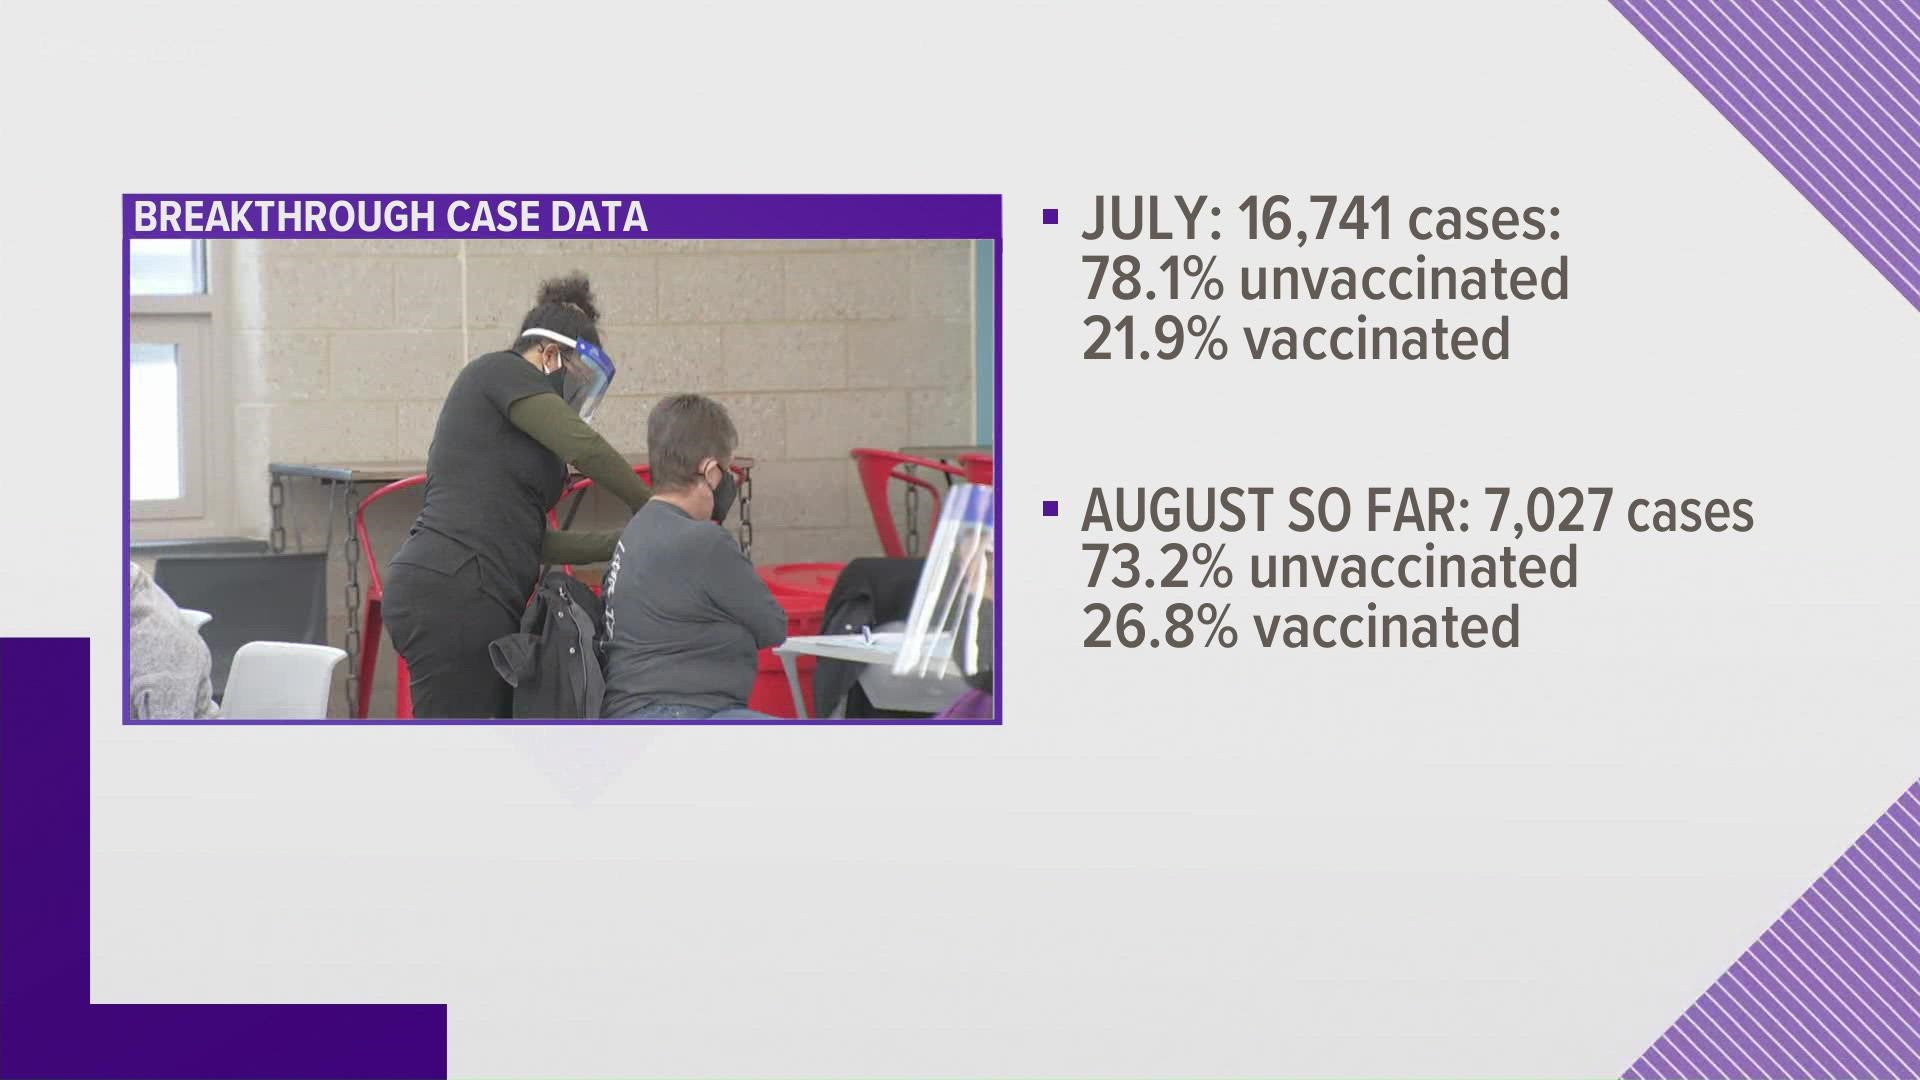 The delta variant is causing many of the breakthrough cases where fully vaccinated people test positive for COVID-19.